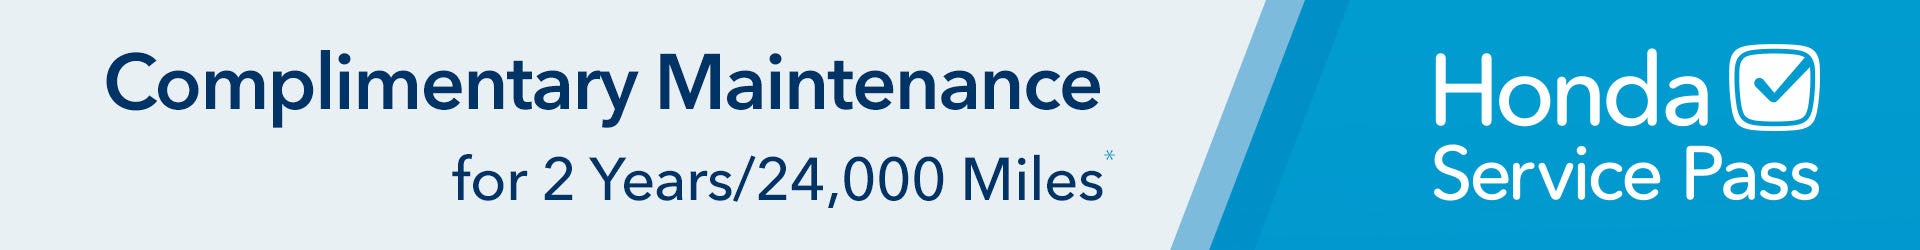 Complimentary Maintenance for 2 years / 24,000 Miles Honda Service Pass | Fred Anderson Honda in Greenville SC